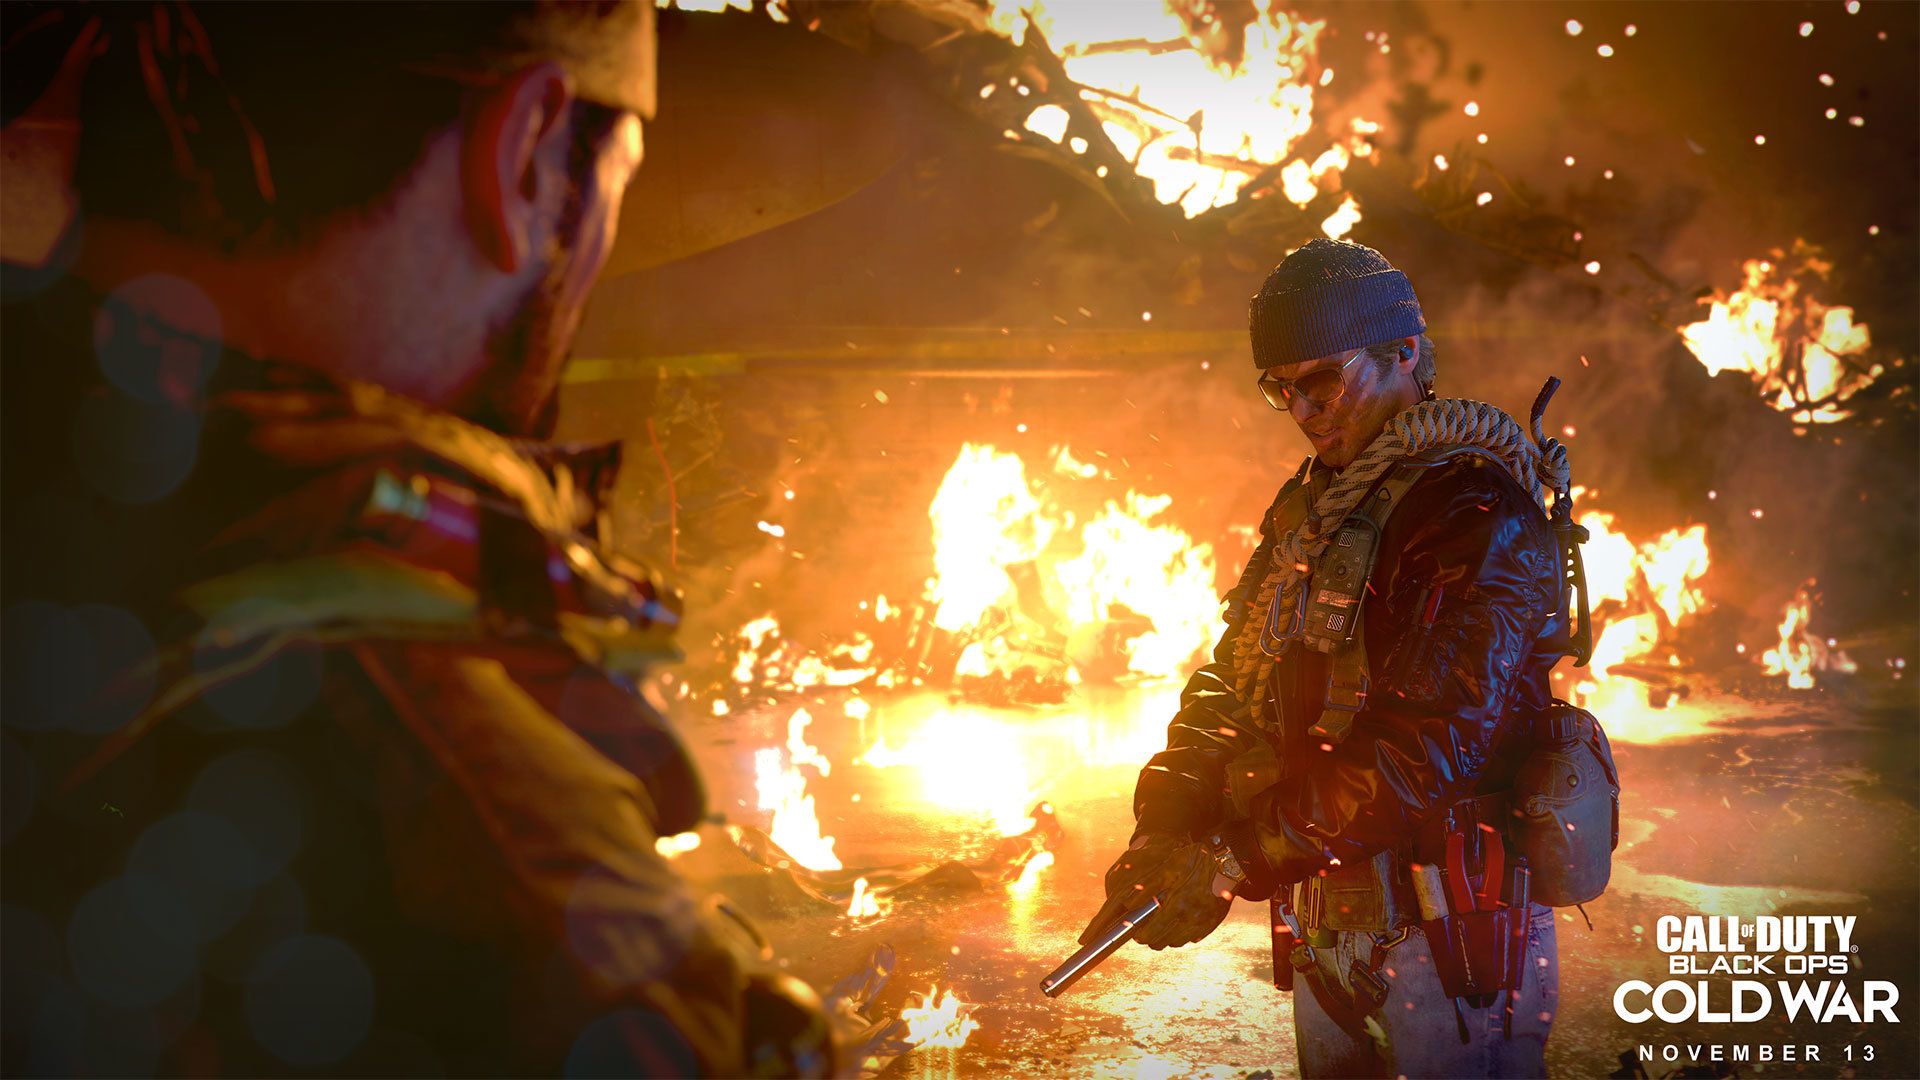 Call Of Duty: Black Ops Cold War Open Beta Is Coming To PS4 First